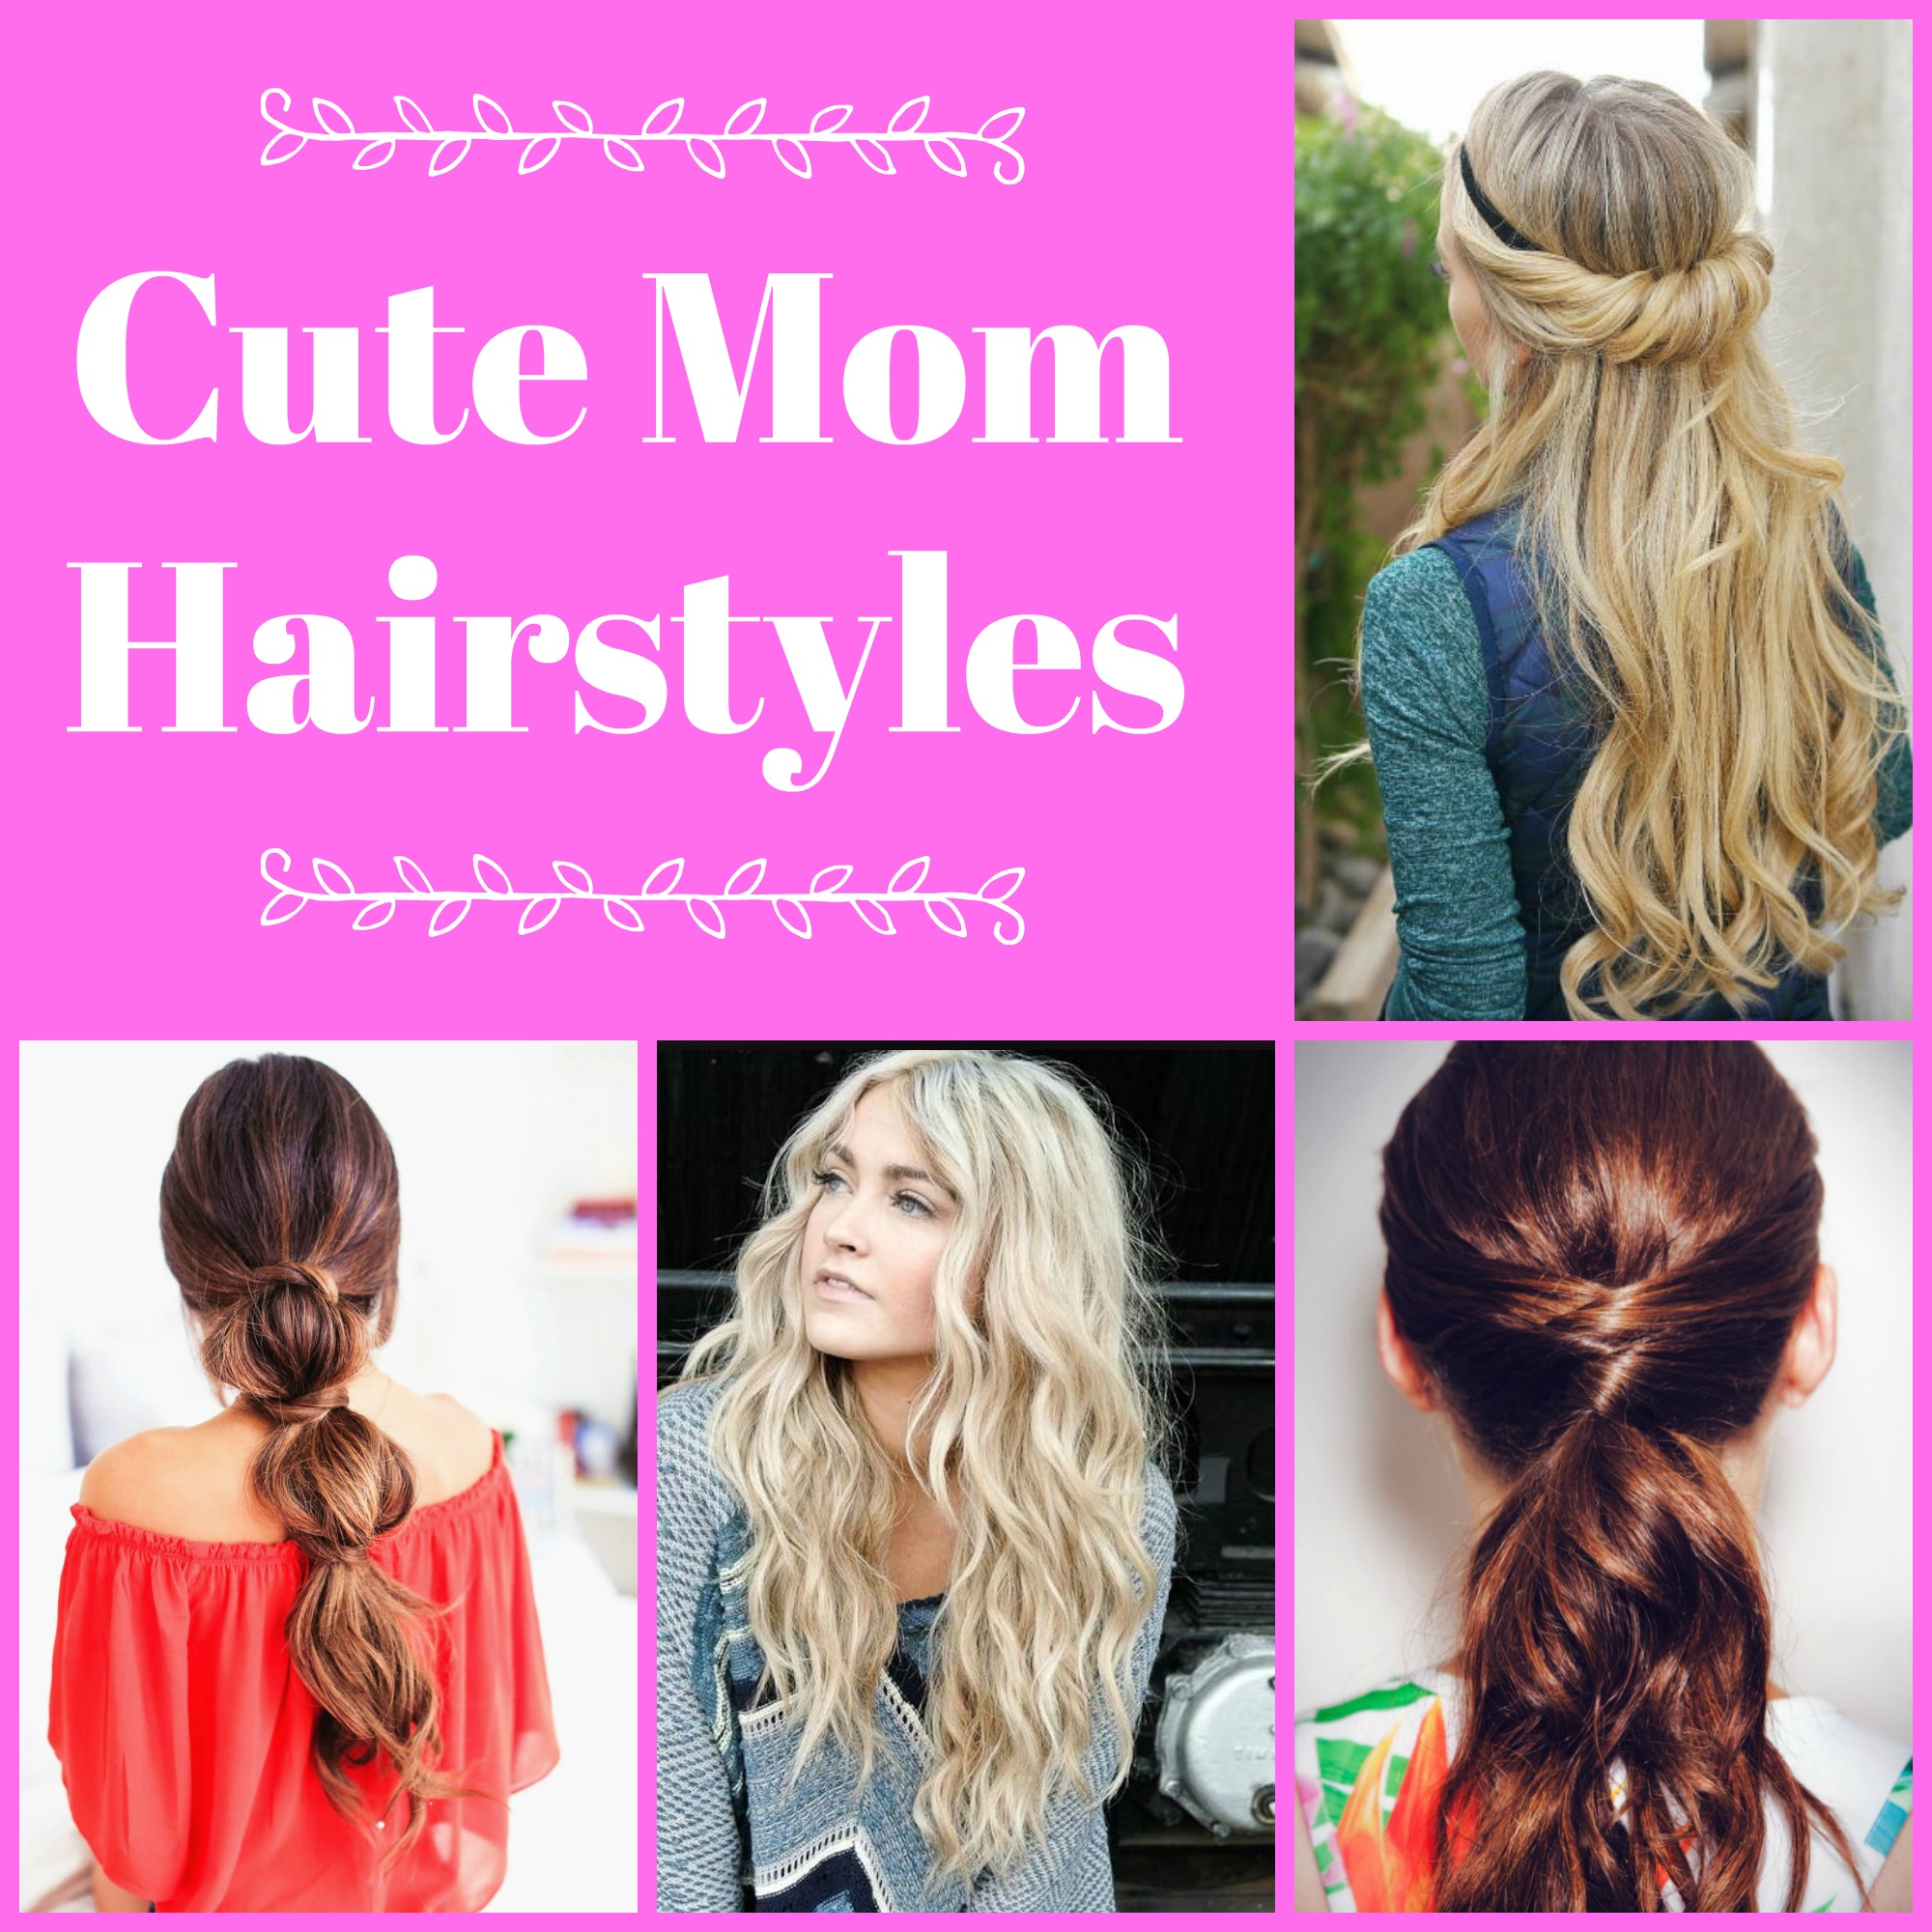 Cute Mom Hairstyles - A Nation of Moms